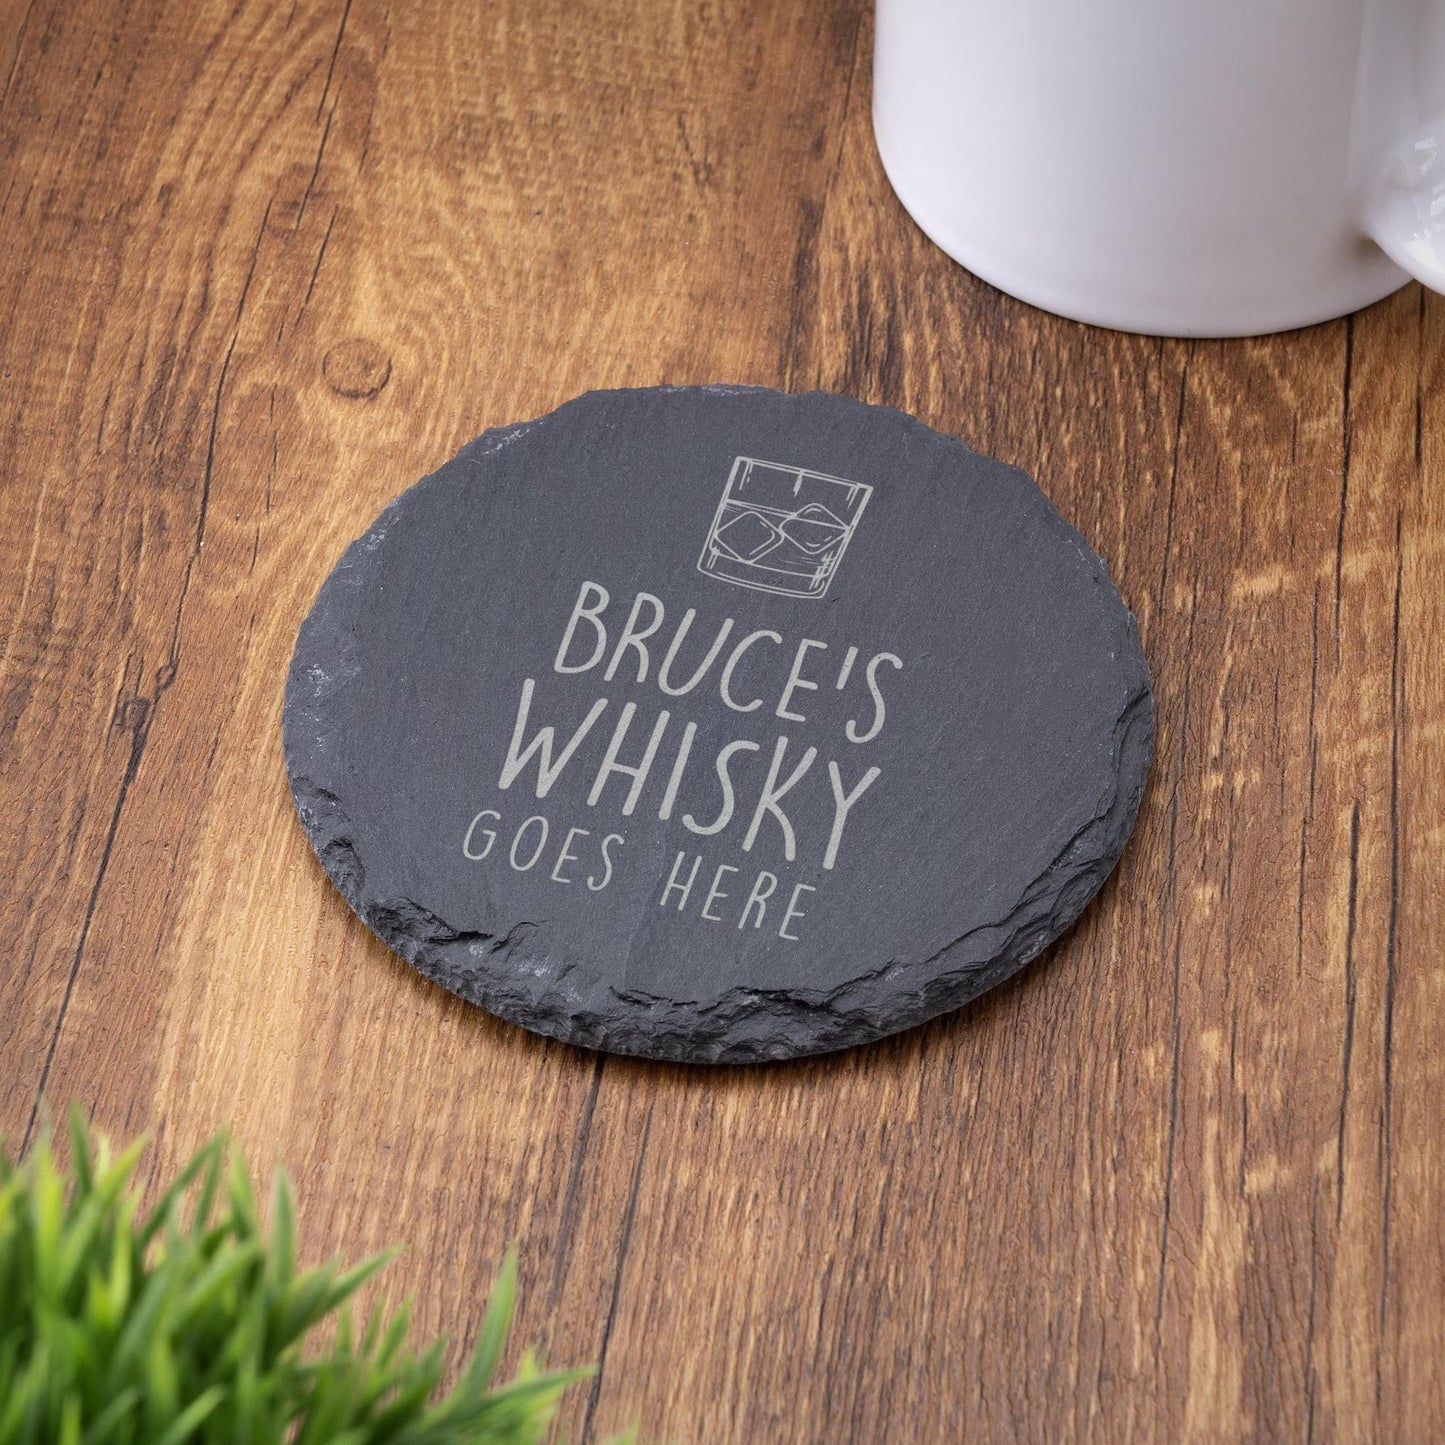 Personalized Exquisitely Crafted Stone Coasters: Elevate Your Table Décor!